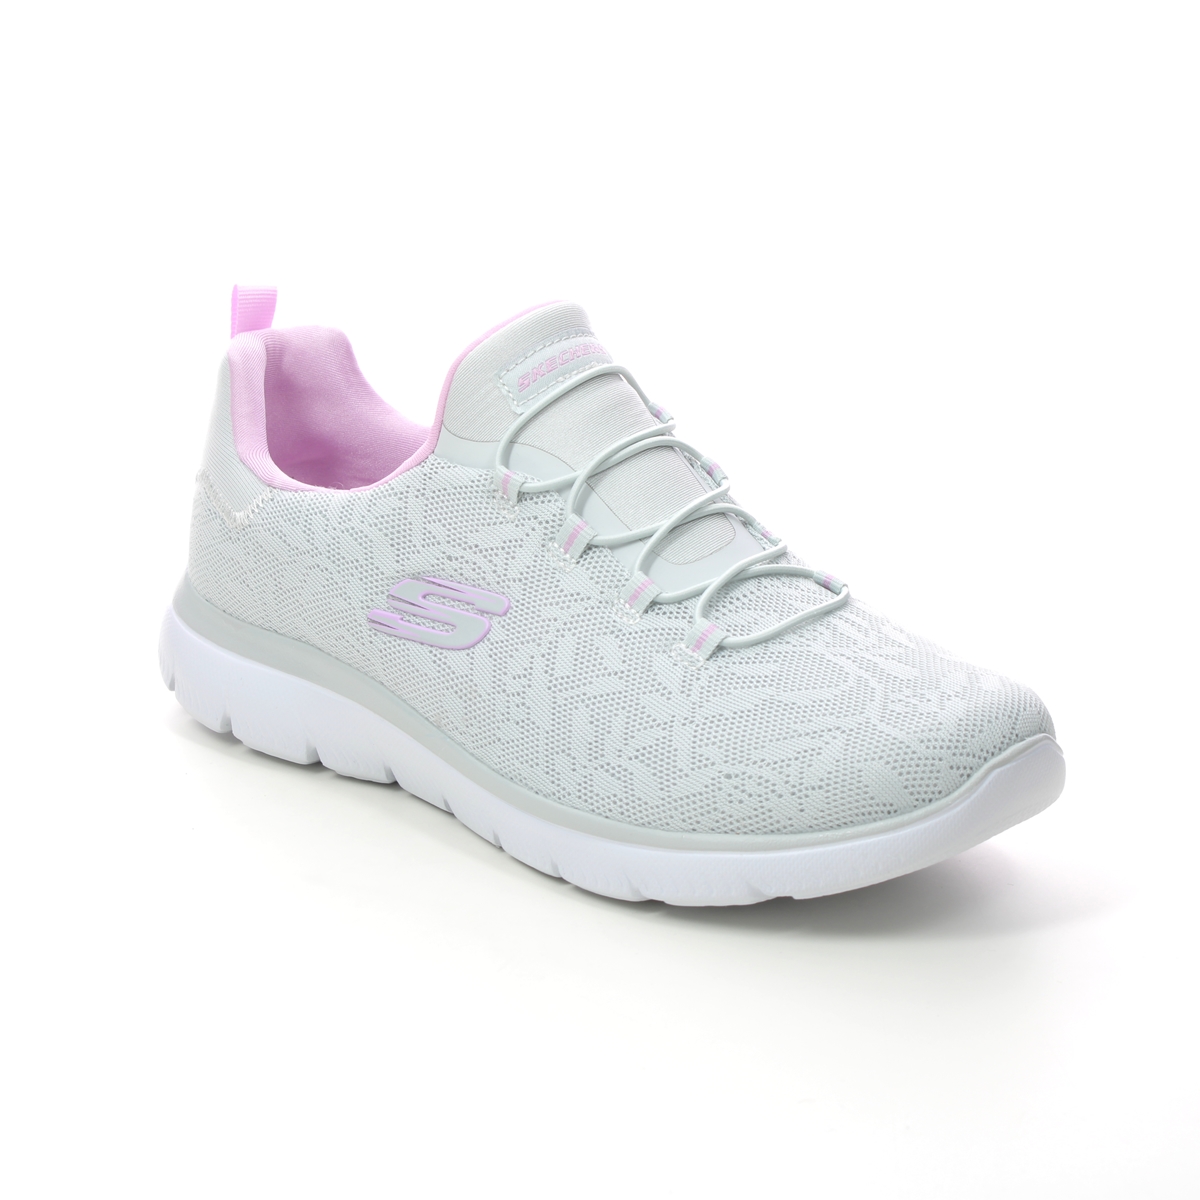 Skechers Summits Good Taste LGLV Light Grey Lavender Womens trainers 149936 in a Plain Textile in Size 8